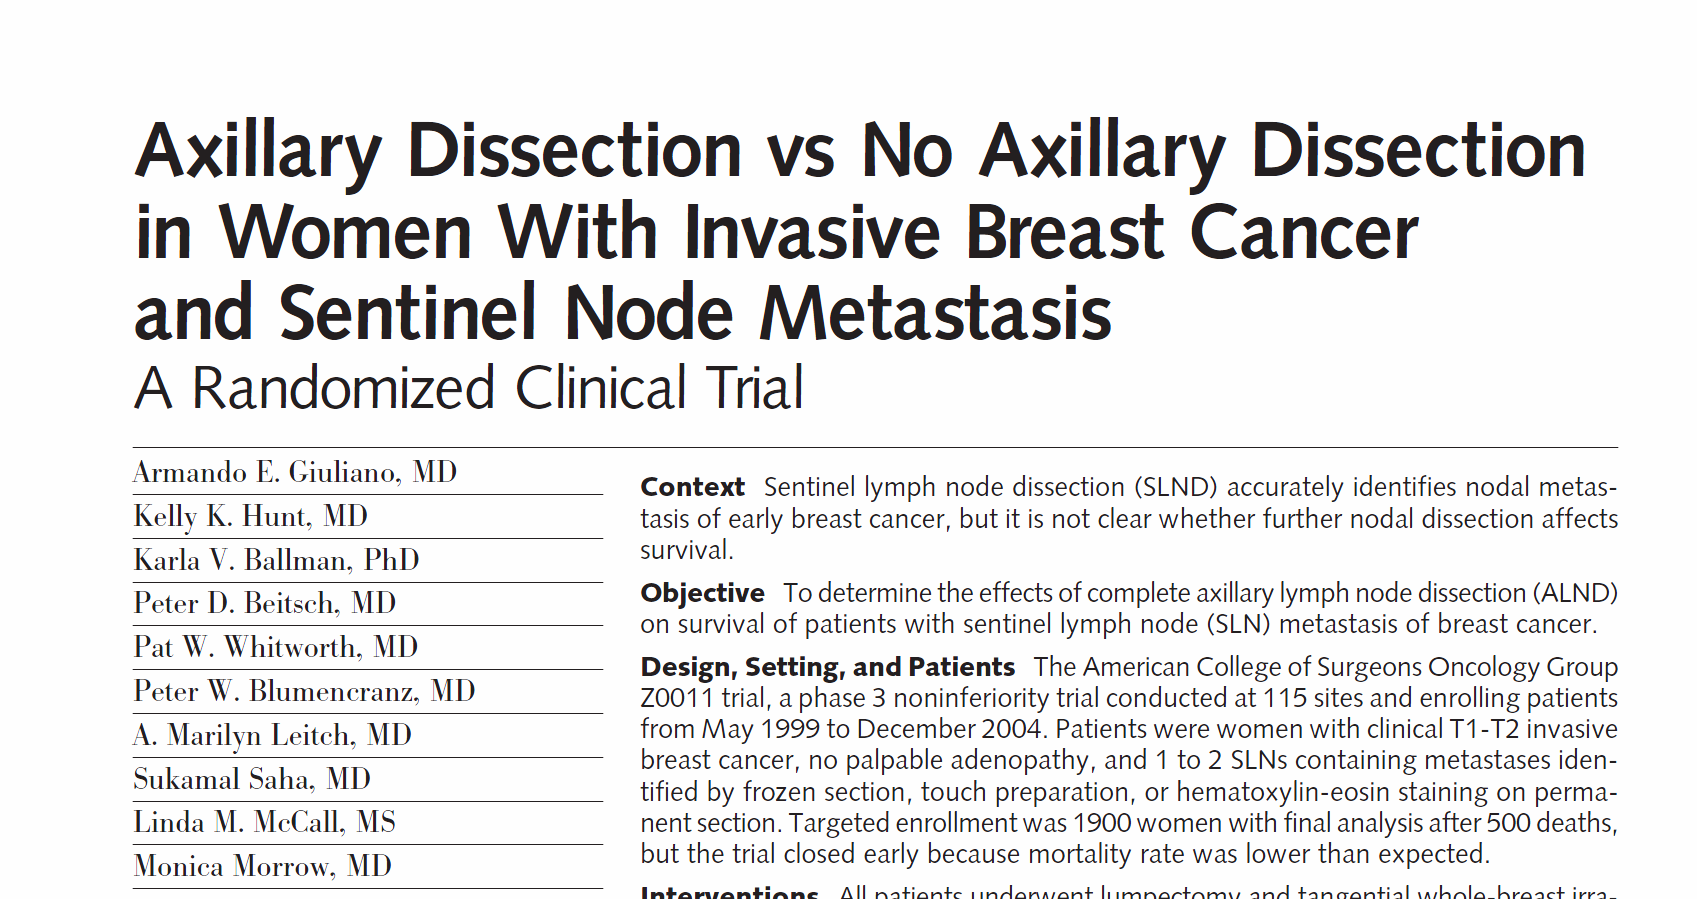 Conclusion Among patients with limited SLN metastatic breast cancer treated with breast conservation and systemic therapy, the use of SLND alone compared with ALND did not result in inferior survival.